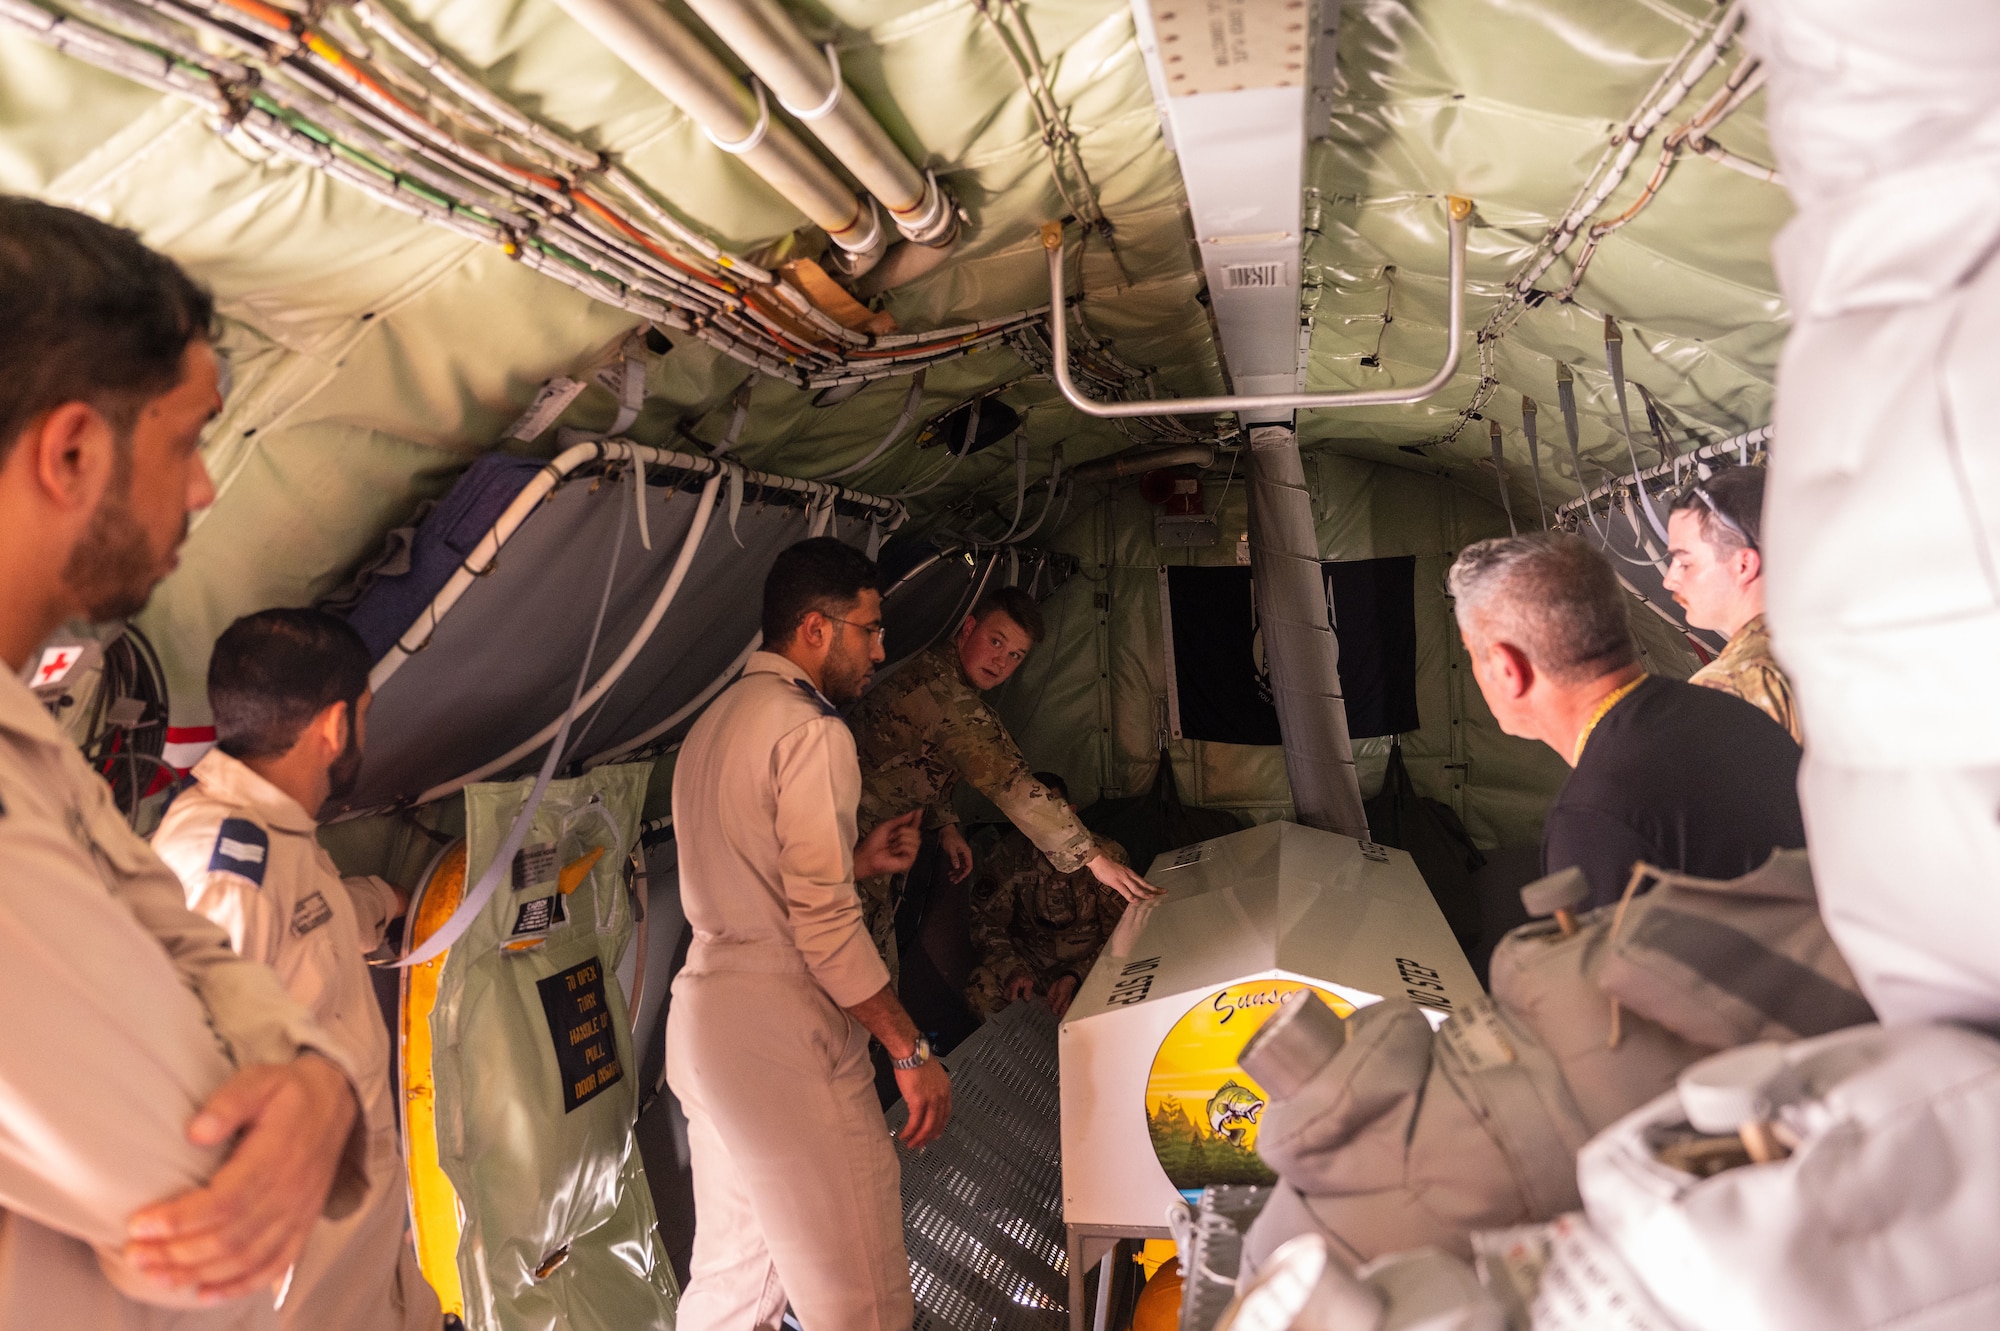 U.S. Air Force Staff Sgt. Nathaniel Dressler, a firefighter assigned to the 379th Air Expeditionary Wing, demonstrates aircraft safety features on a U.S. Air Force KC-135 Stratotanker aircraft, assigned to the 340th Expeditionary Air Refueling Squadron, to Royal Air Force of Oman firemen at Thumrait Air Base, Oman, May 18, 2022. Dressler shared details about operating the KC-135 aircraft’s fire suppression and evacuation systems throughout the interior of the aircraft. (U.S. Air Force photo by Staff Sgt. Dana Tourtellotte)